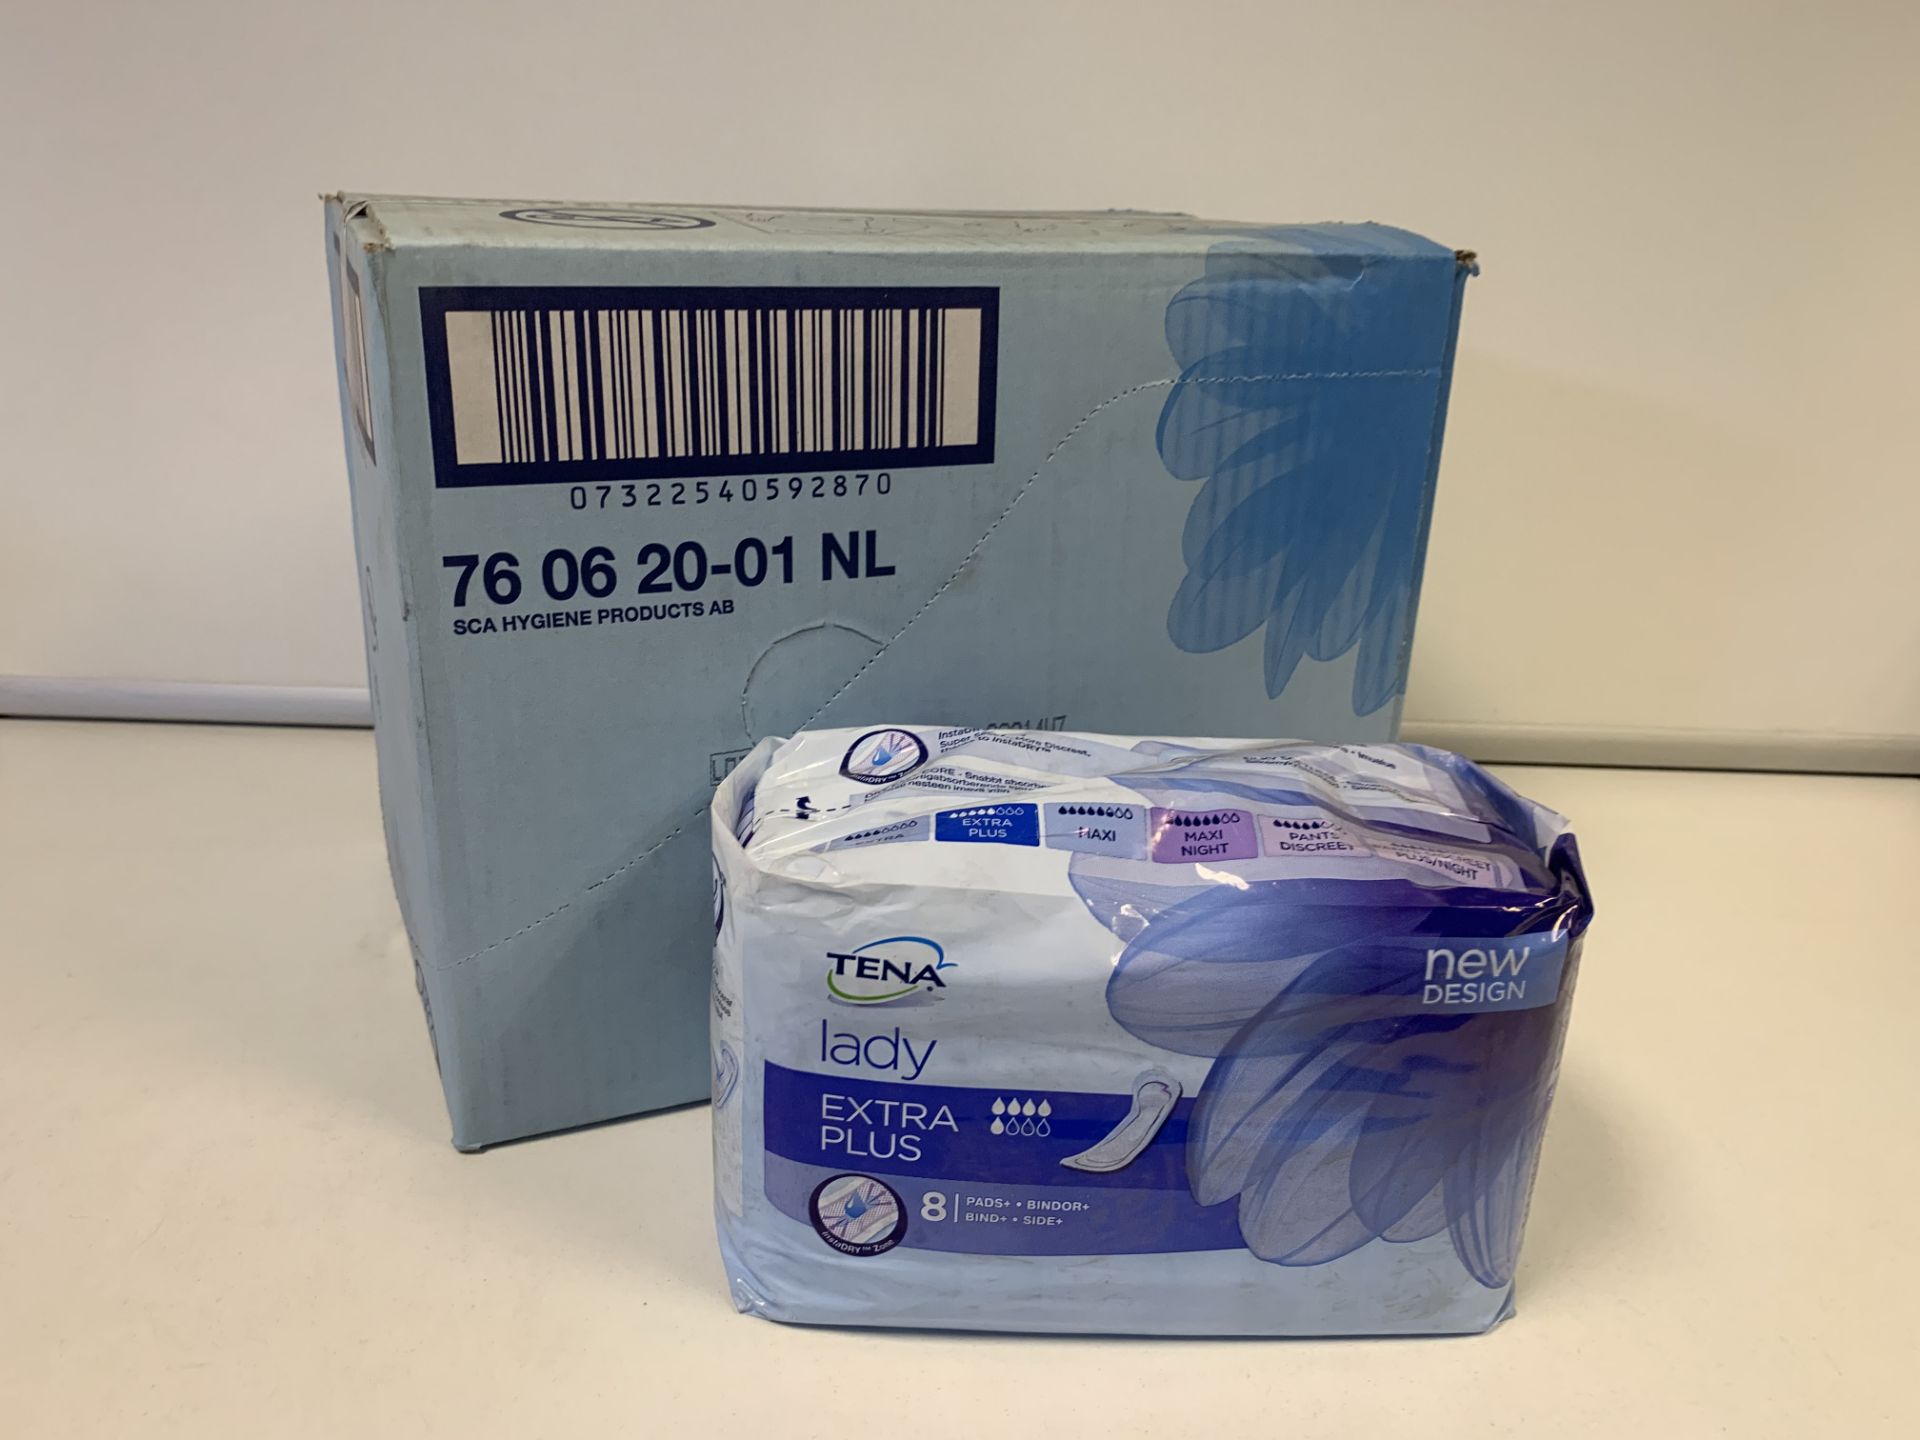 60 X PACKS OF 8 TENA LADY EXTRA PLUS IN 10 BOXES